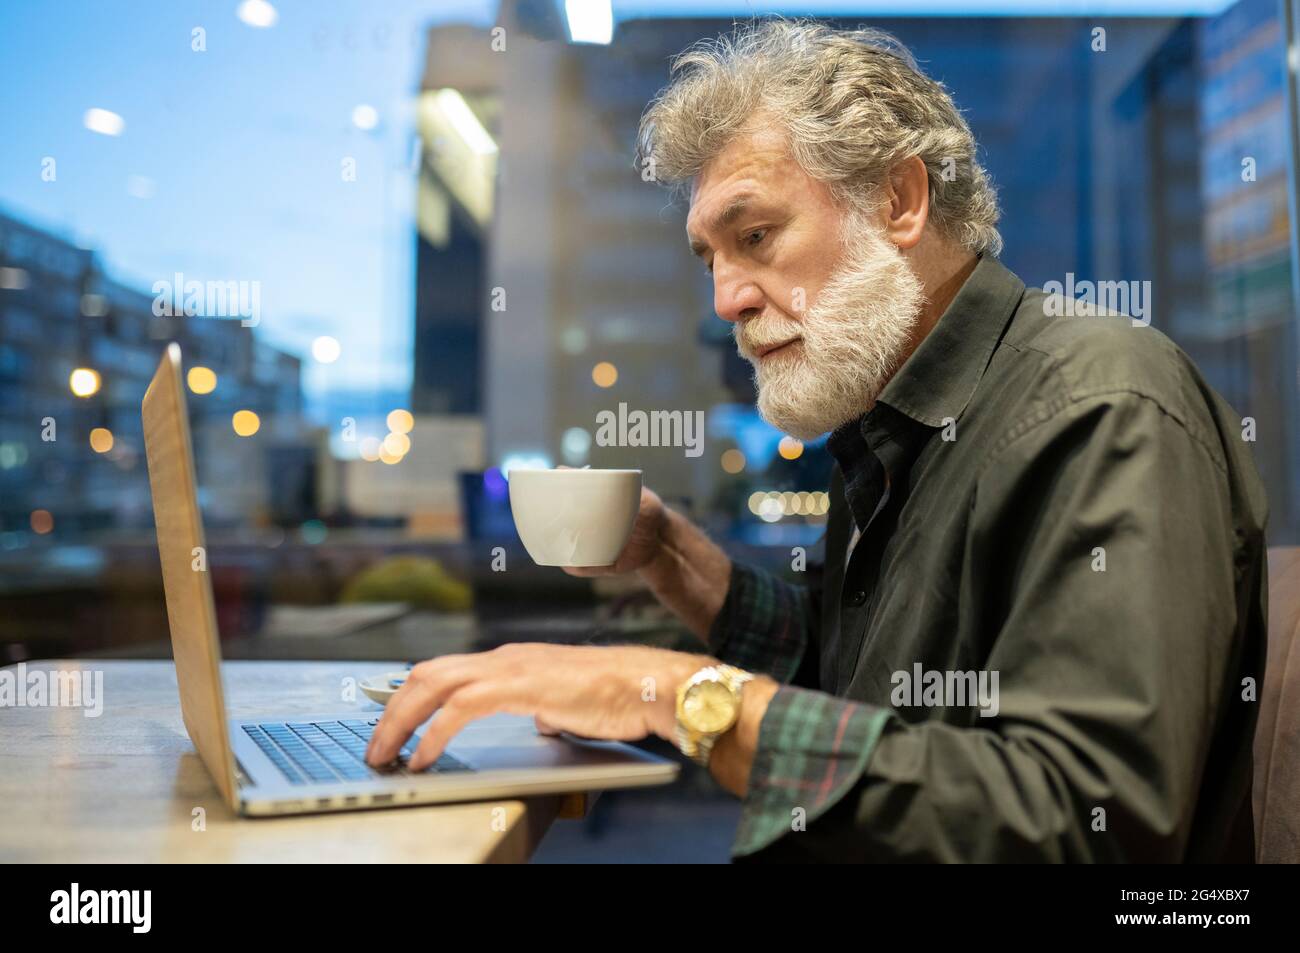 Businessman using laptop while working in cafe Stock Photo